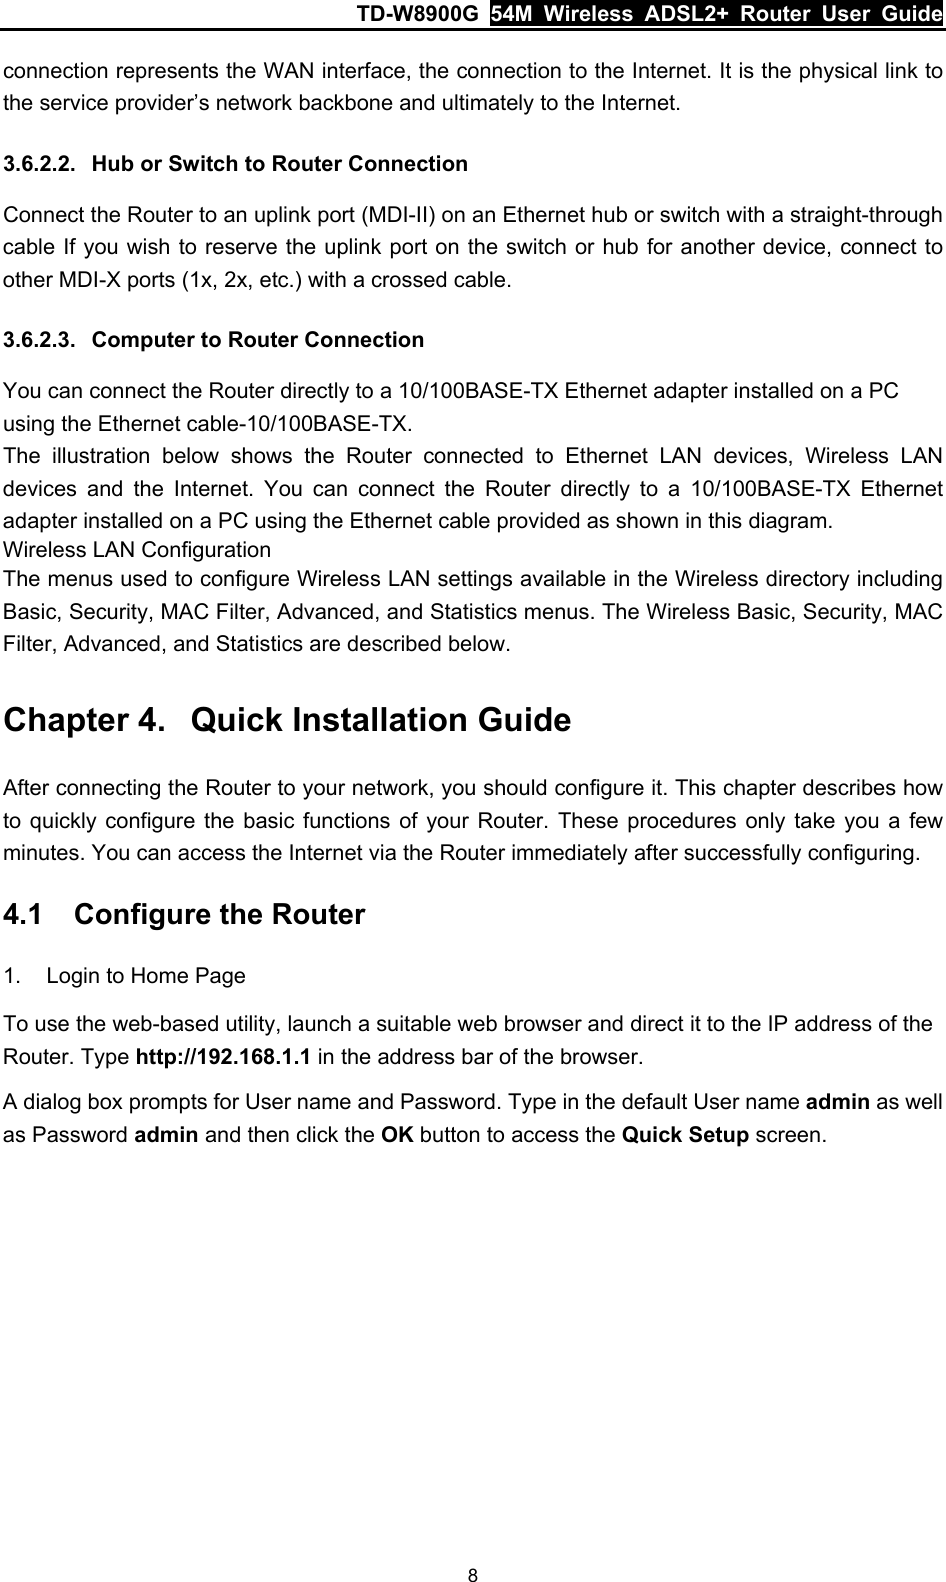 TD-W8900G  54M Wireless ADSL2+ Router User Guide 8 connection represents the WAN interface, the connection to the Internet. It is the physical link to the service provider’s network backbone and ultimately to the Internet. 3.6.2.2.  Hub or Switch to Router Connection Connect the Router to an uplink port (MDI-II) on an Ethernet hub or switch with a straight-through cable If you wish to reserve the uplink port on the switch or hub for another device, connect to other MDI-X ports (1x, 2x, etc.) with a crossed cable. 3.6.2.3.  Computer to Router Connection You can connect the Router directly to a 10/100BASE-TX Ethernet adapter installed on a PC using the Ethernet cable-10/100BASE-TX. The illustration below shows the Router connected to Ethernet LAN devices, Wireless LAN devices and the Internet. You can connect the Router directly to a 10/100BASE-TX Ethernet adapter installed on a PC using the Ethernet cable provided as shown in this diagram. Wireless LAN Configuration The menus used to configure Wireless LAN settings available in the Wireless directory including Basic, Security, MAC Filter, Advanced, and Statistics menus. The Wireless Basic, Security, MAC Filter, Advanced, and Statistics are described below. Chapter 4.  Quick Installation Guide After connecting the Router to your network, you should configure it. This chapter describes how to quickly configure the basic functions of your Router. These procedures only take you a few minutes. You can access the Internet via the Router immediately after successfully configuring. 4.1  Configure the Router 1.  Login to Home Page To use the web-based utility, launch a suitable web browser and direct it to the IP address of the Router. Type http://192.168.1.1 in the address bar of the browser. A dialog box prompts for User name and Password. Type in the default User name admin as well as Password admin and then click the OK button to access the Quick Setup screen. 